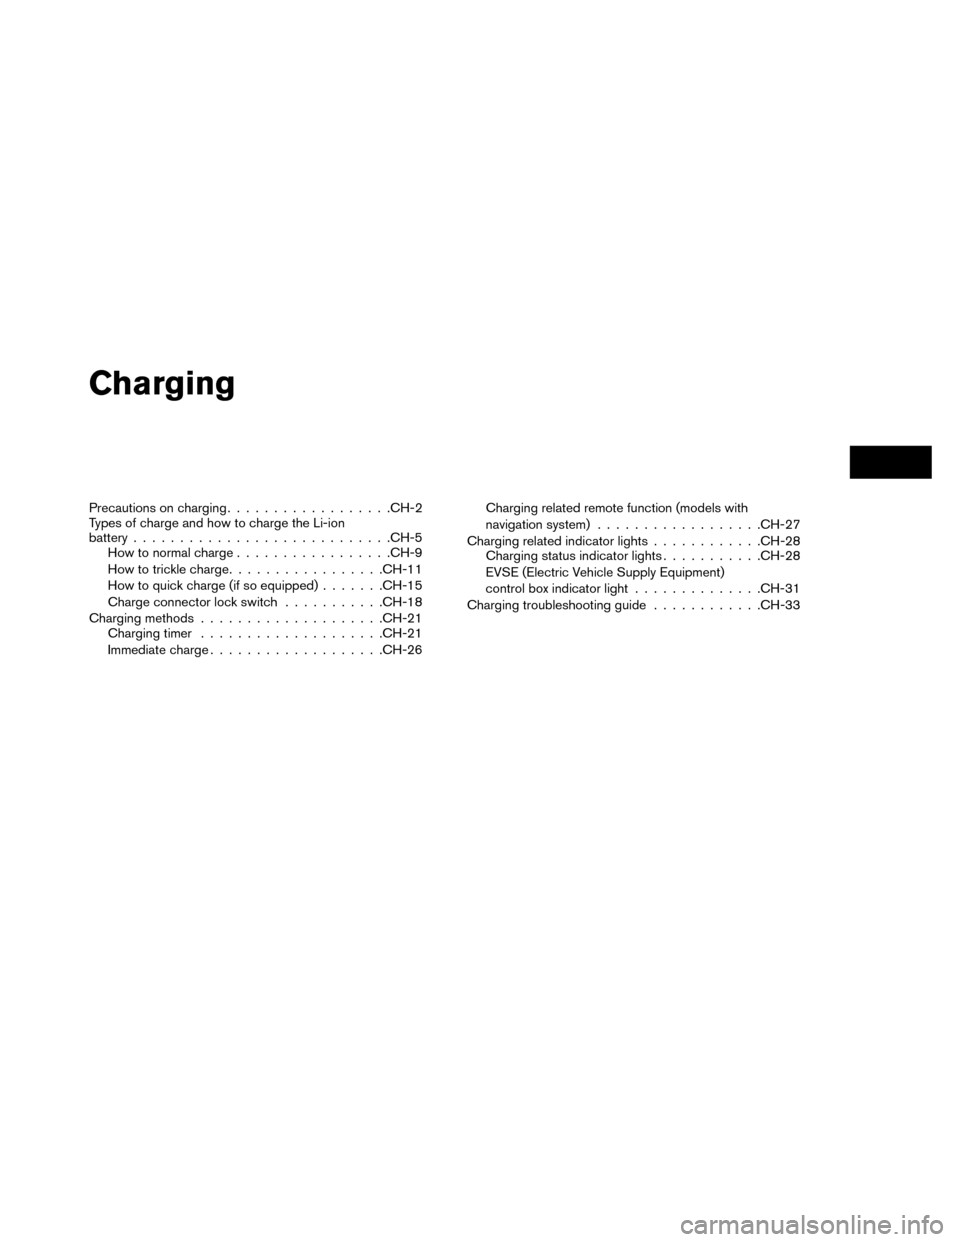 NISSAN LEAF 2015 1.G Owners Manual Charging
Precautions on charging................. .CH-2
Types of charge and how to charge the Li-ion
battery ........................... .CH-5
How to normal charge ................ .CH-9
How to trickl